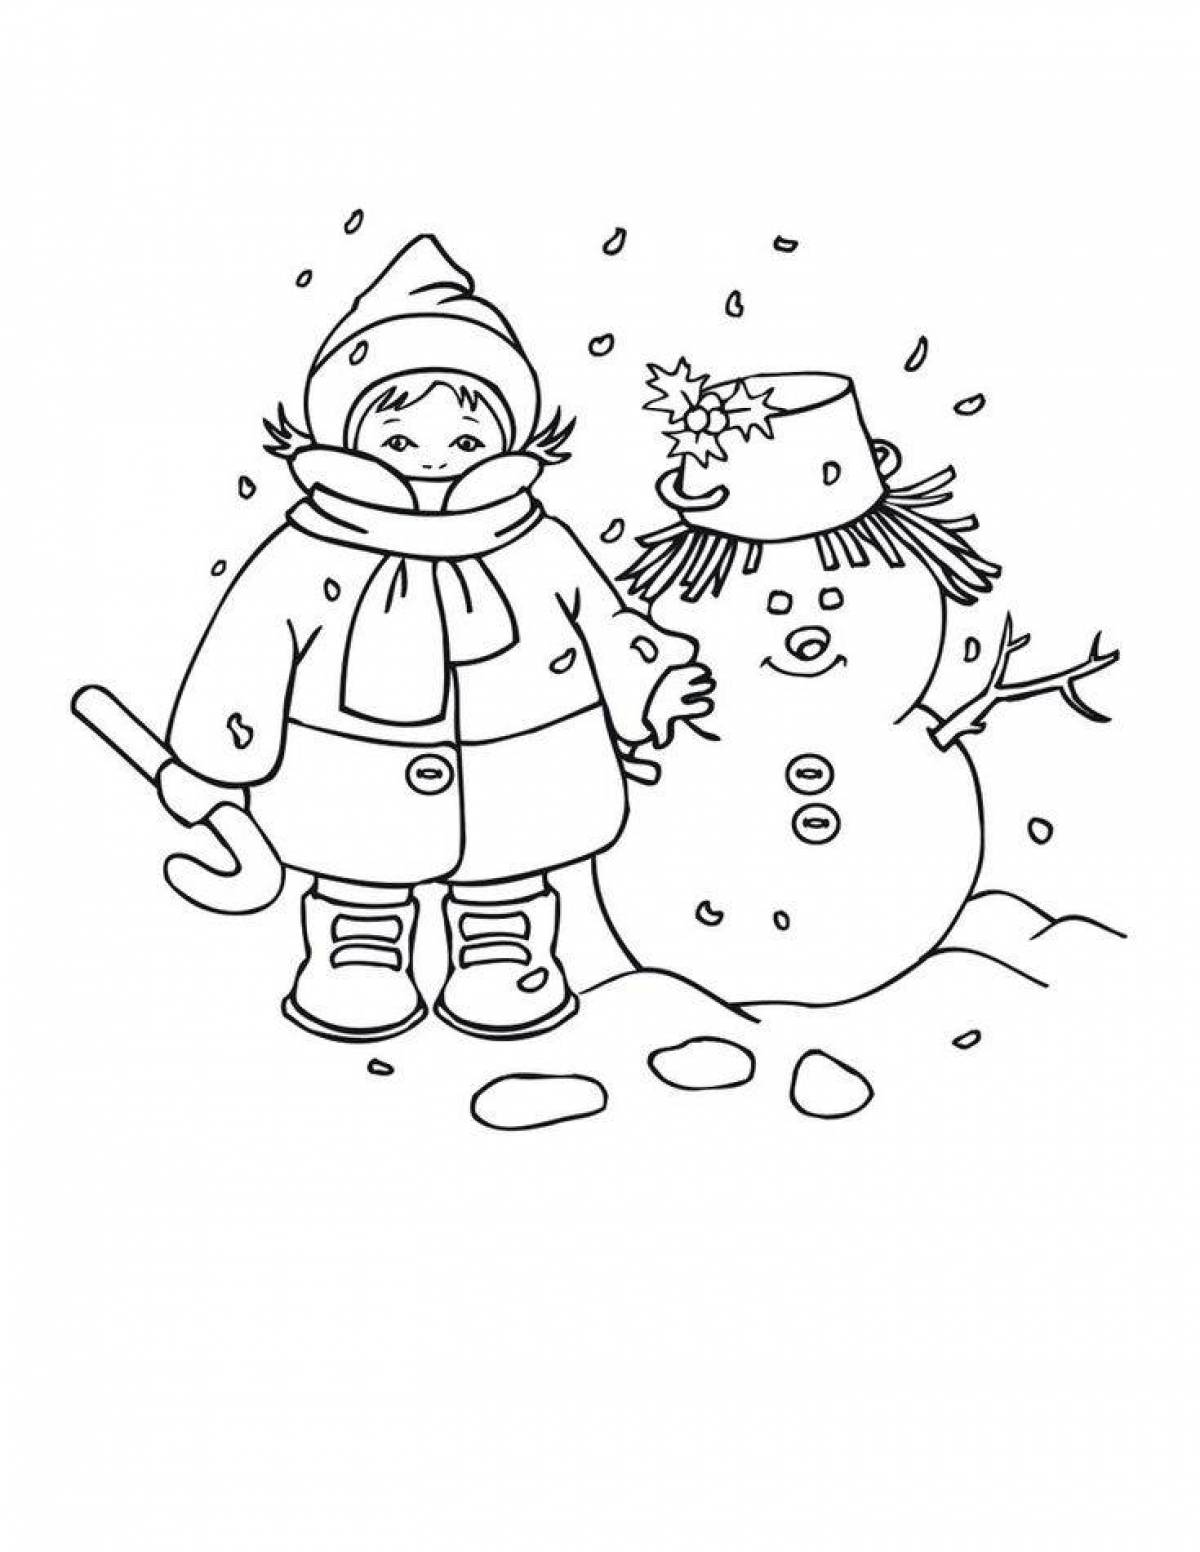 Merry winter coloring book for 4-5 year olds